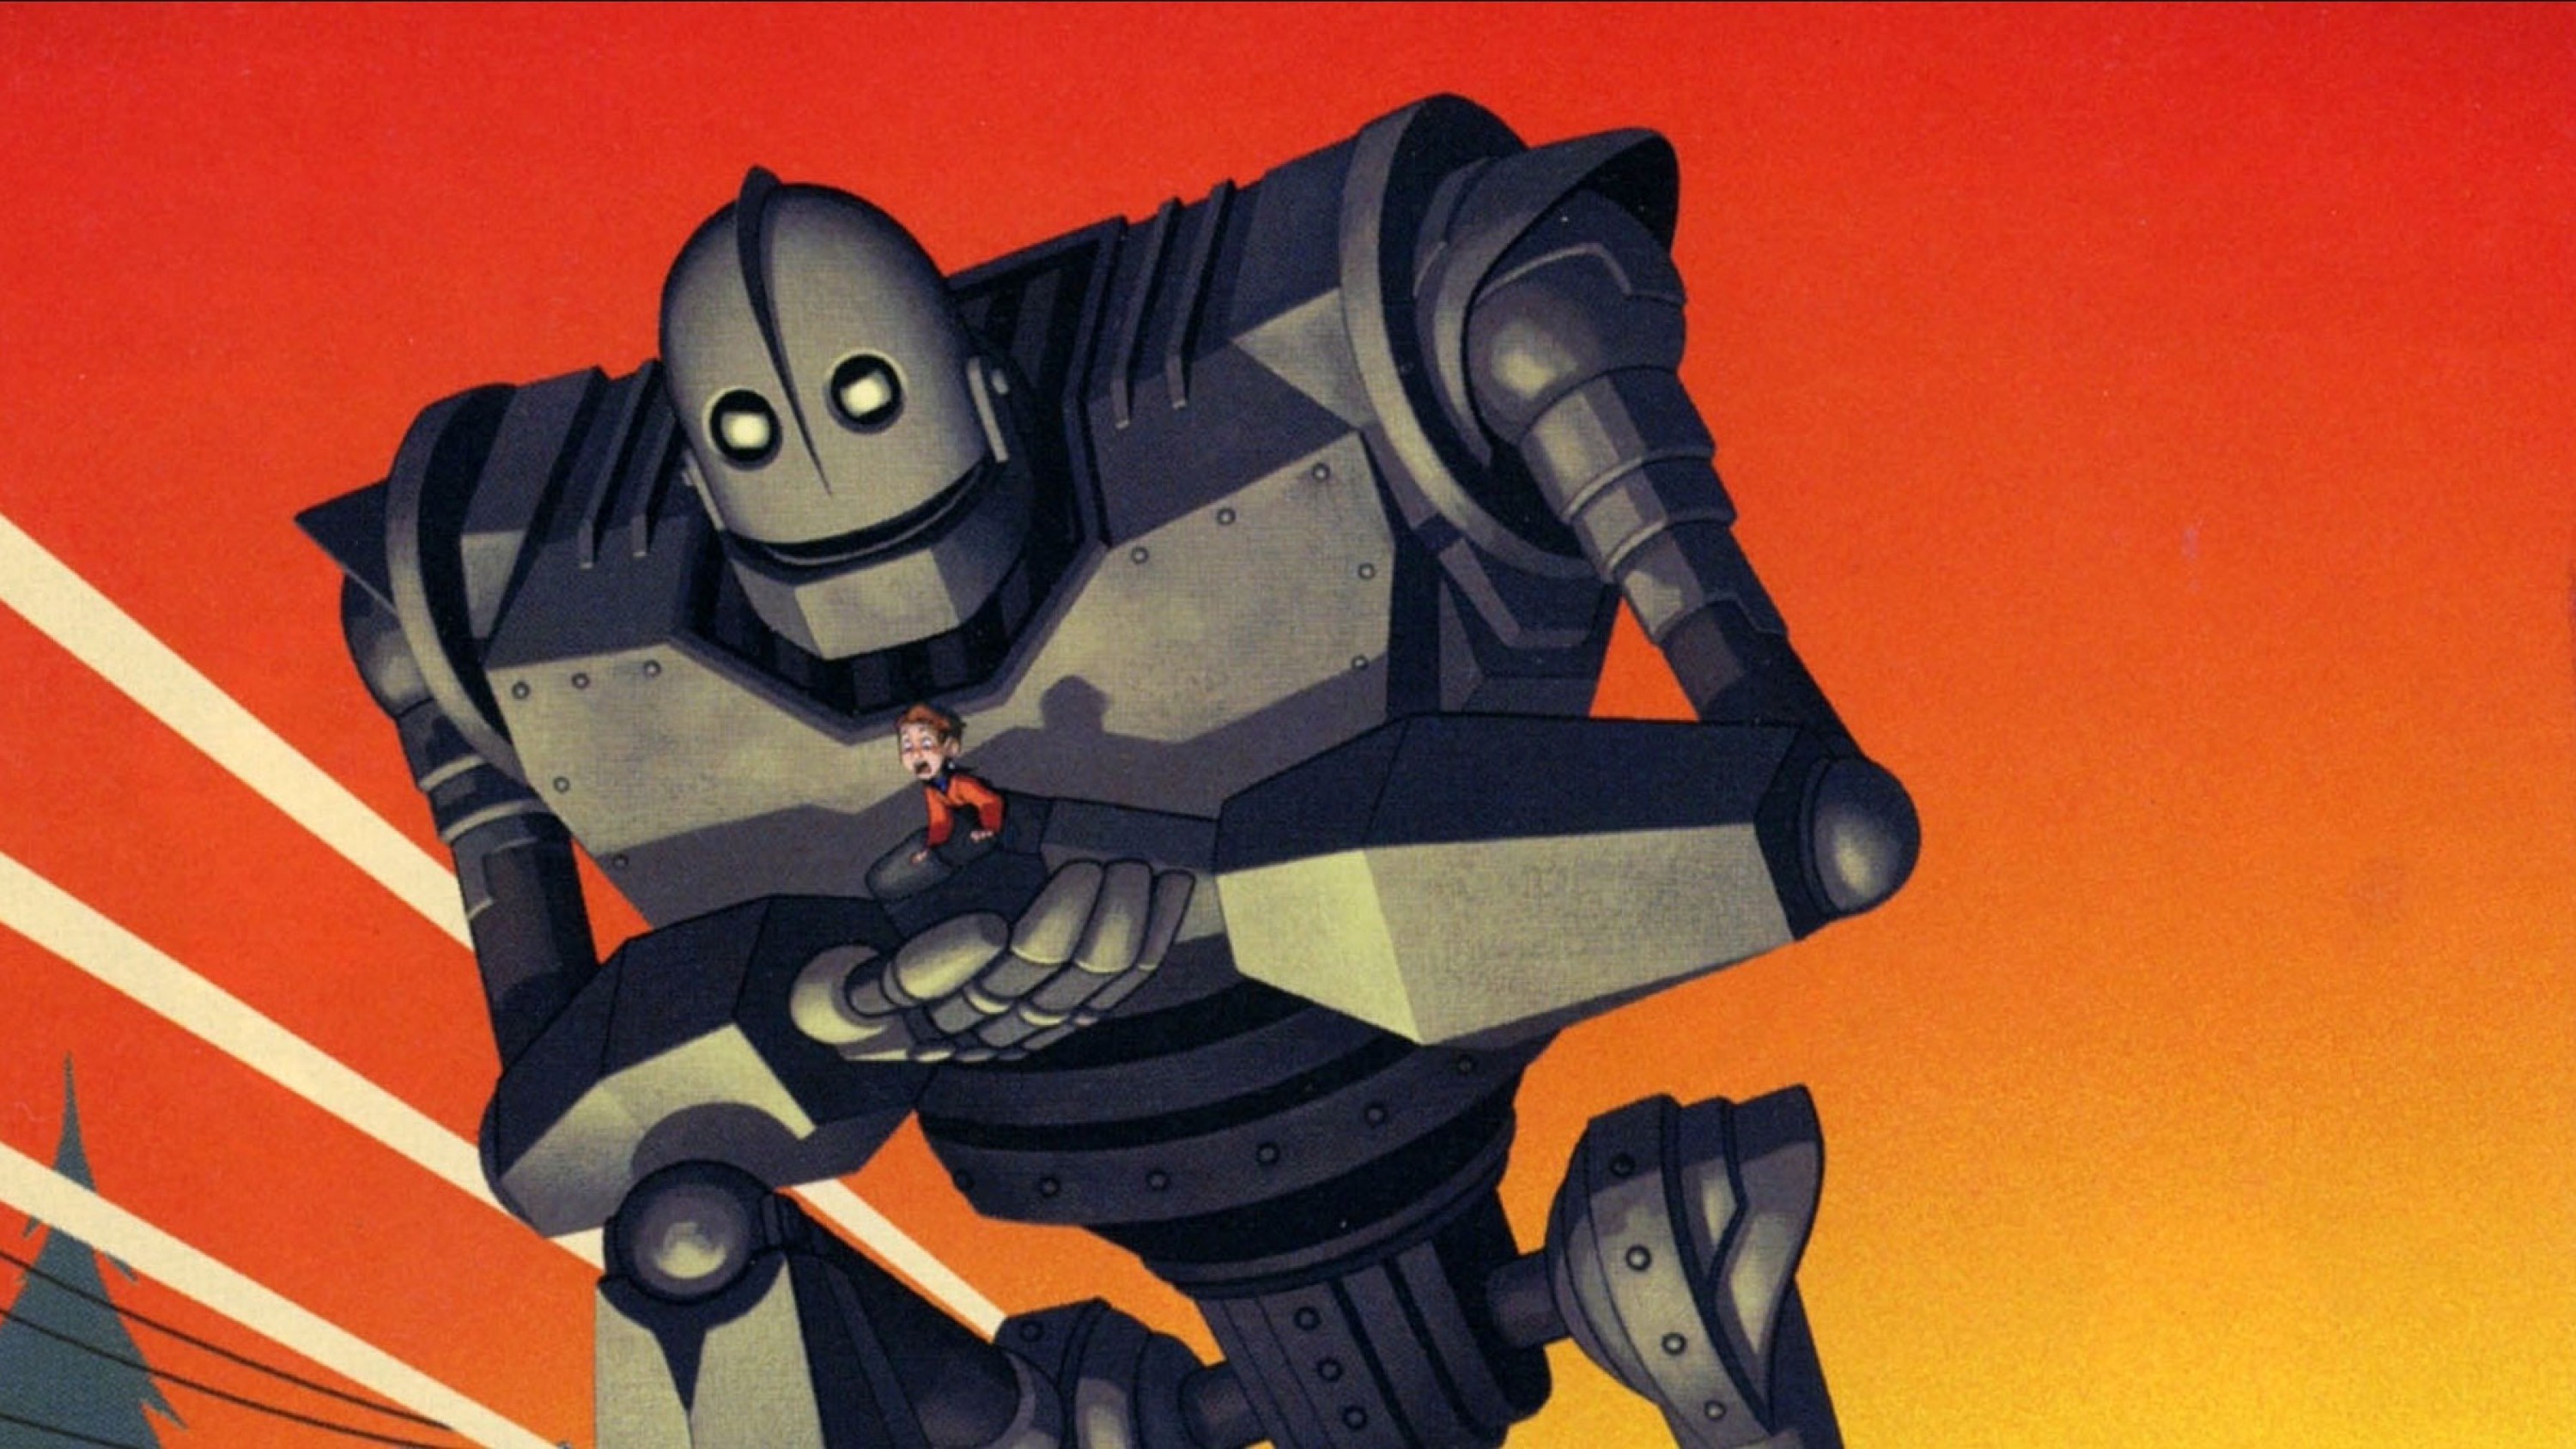 Resource - The Iron Giant: Film Guide - Into Film